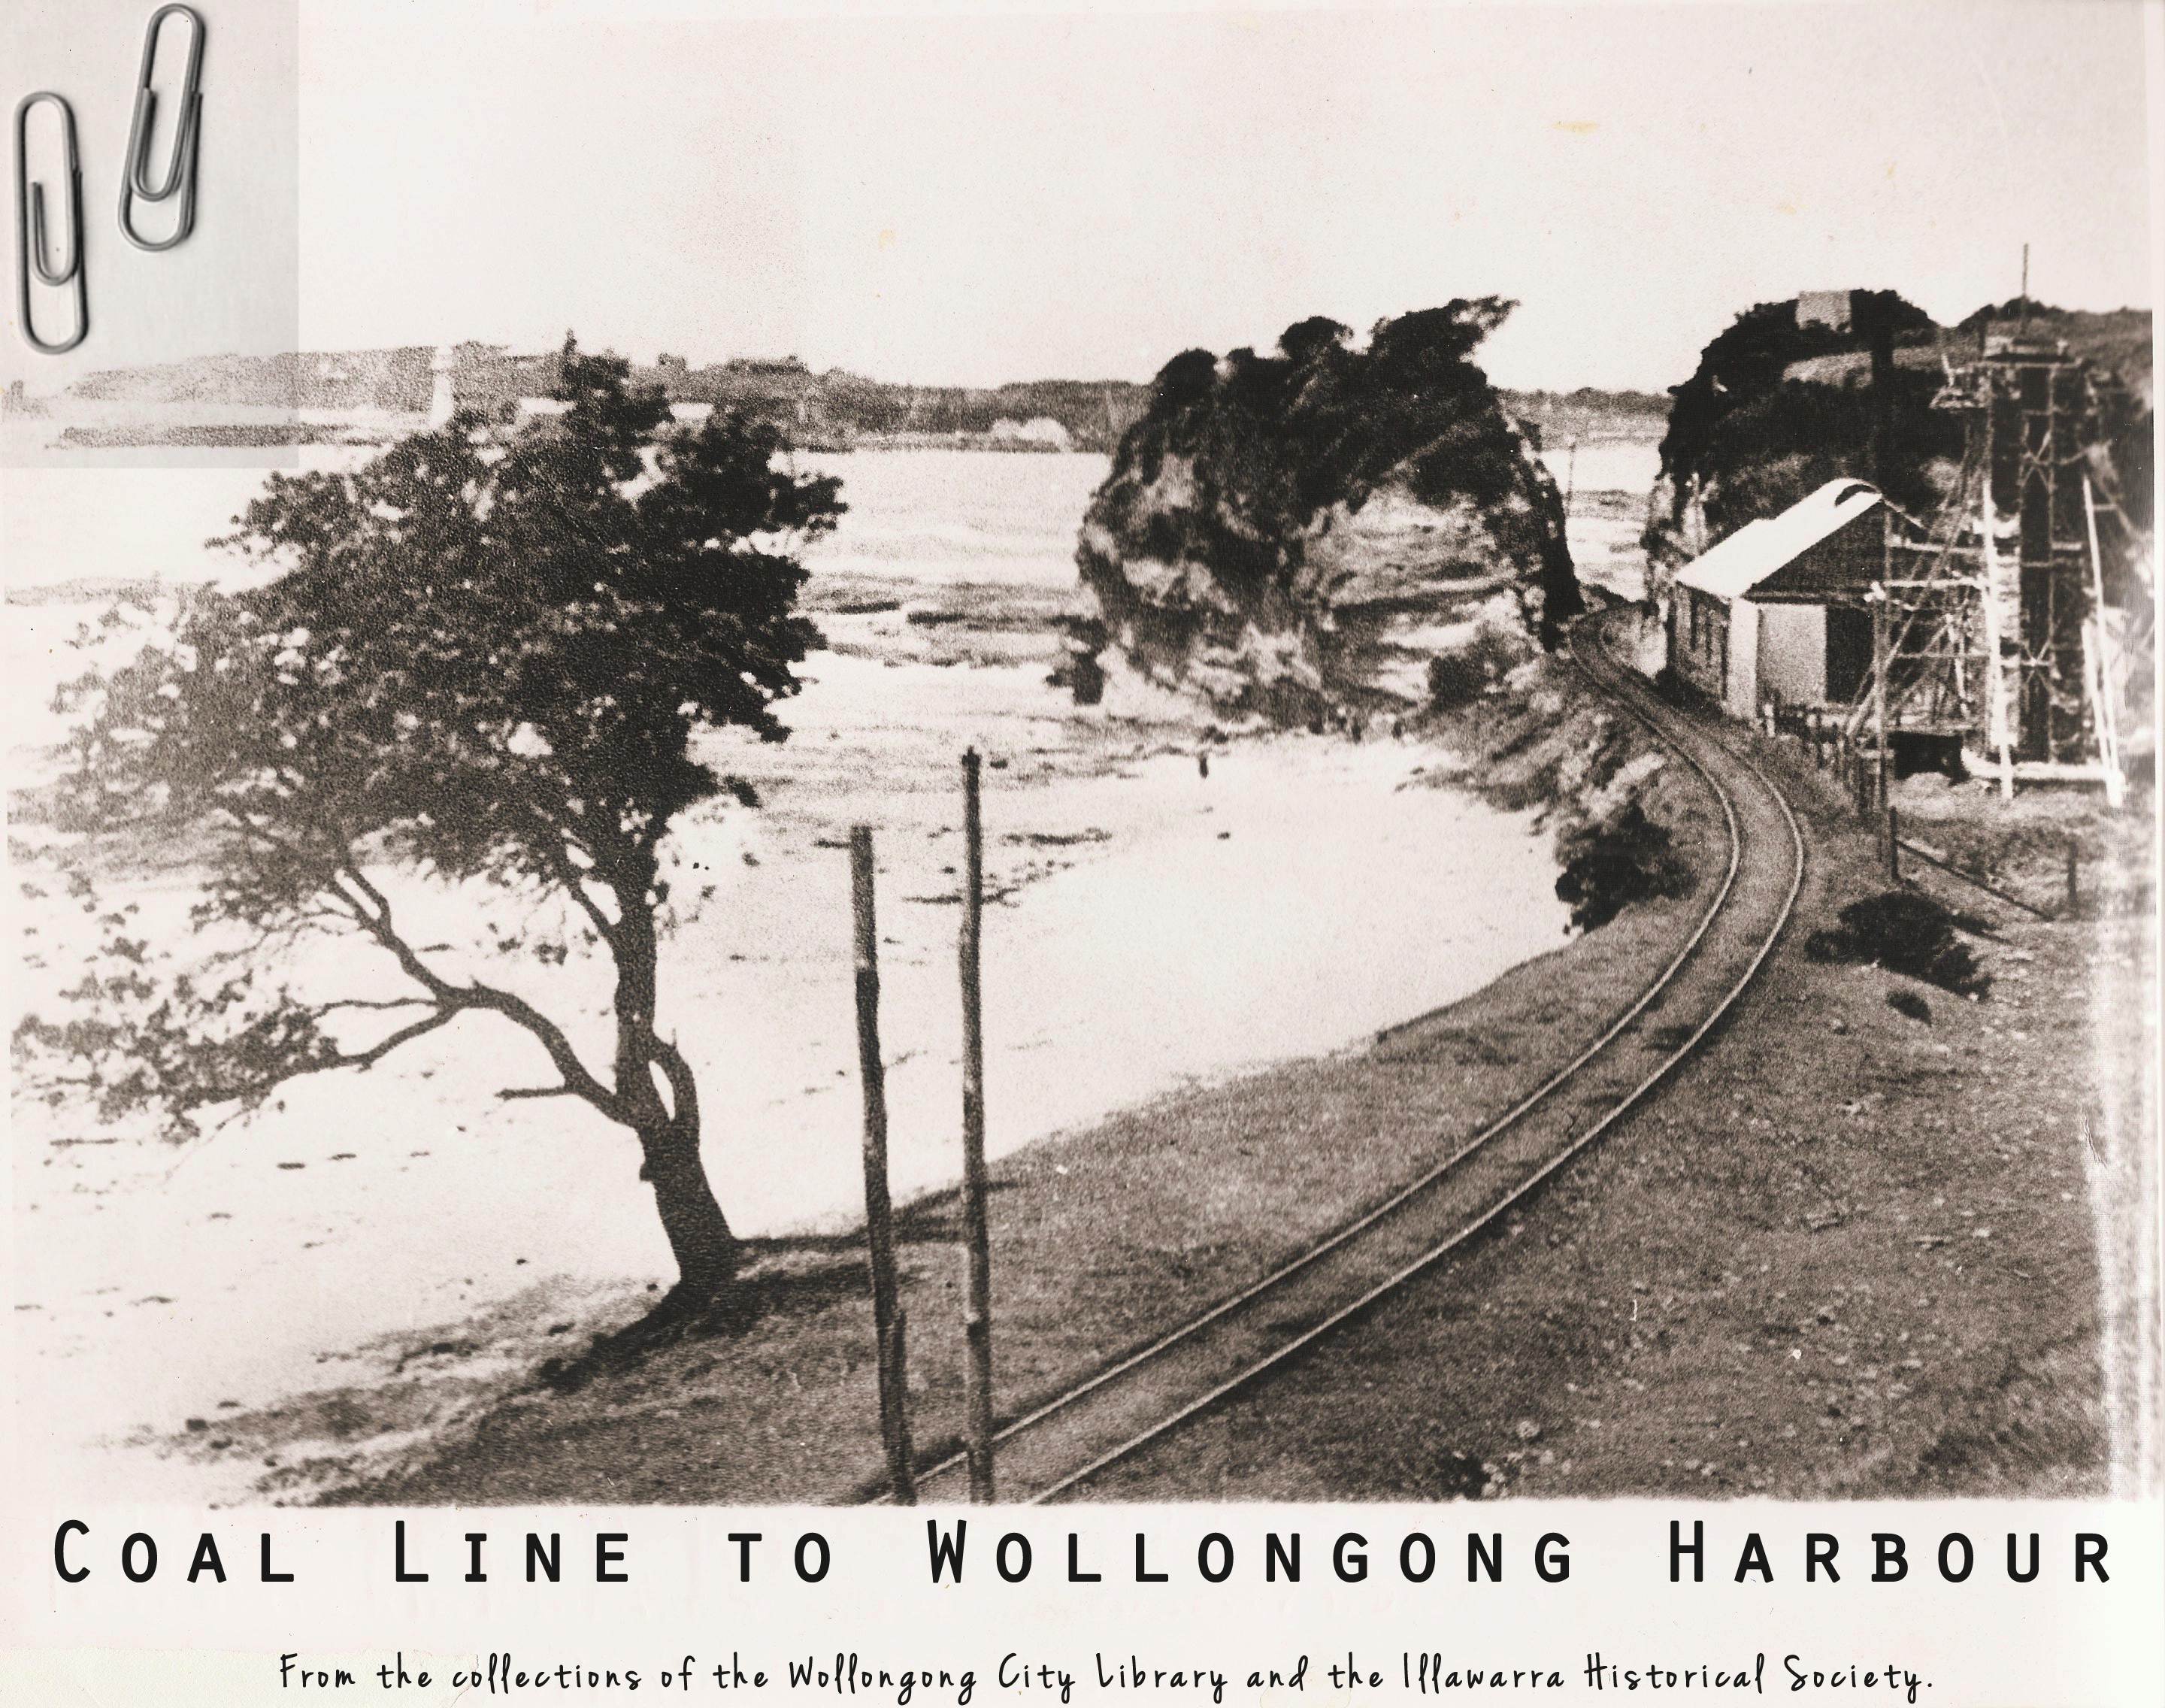 Coal line to Wollongong Harbour